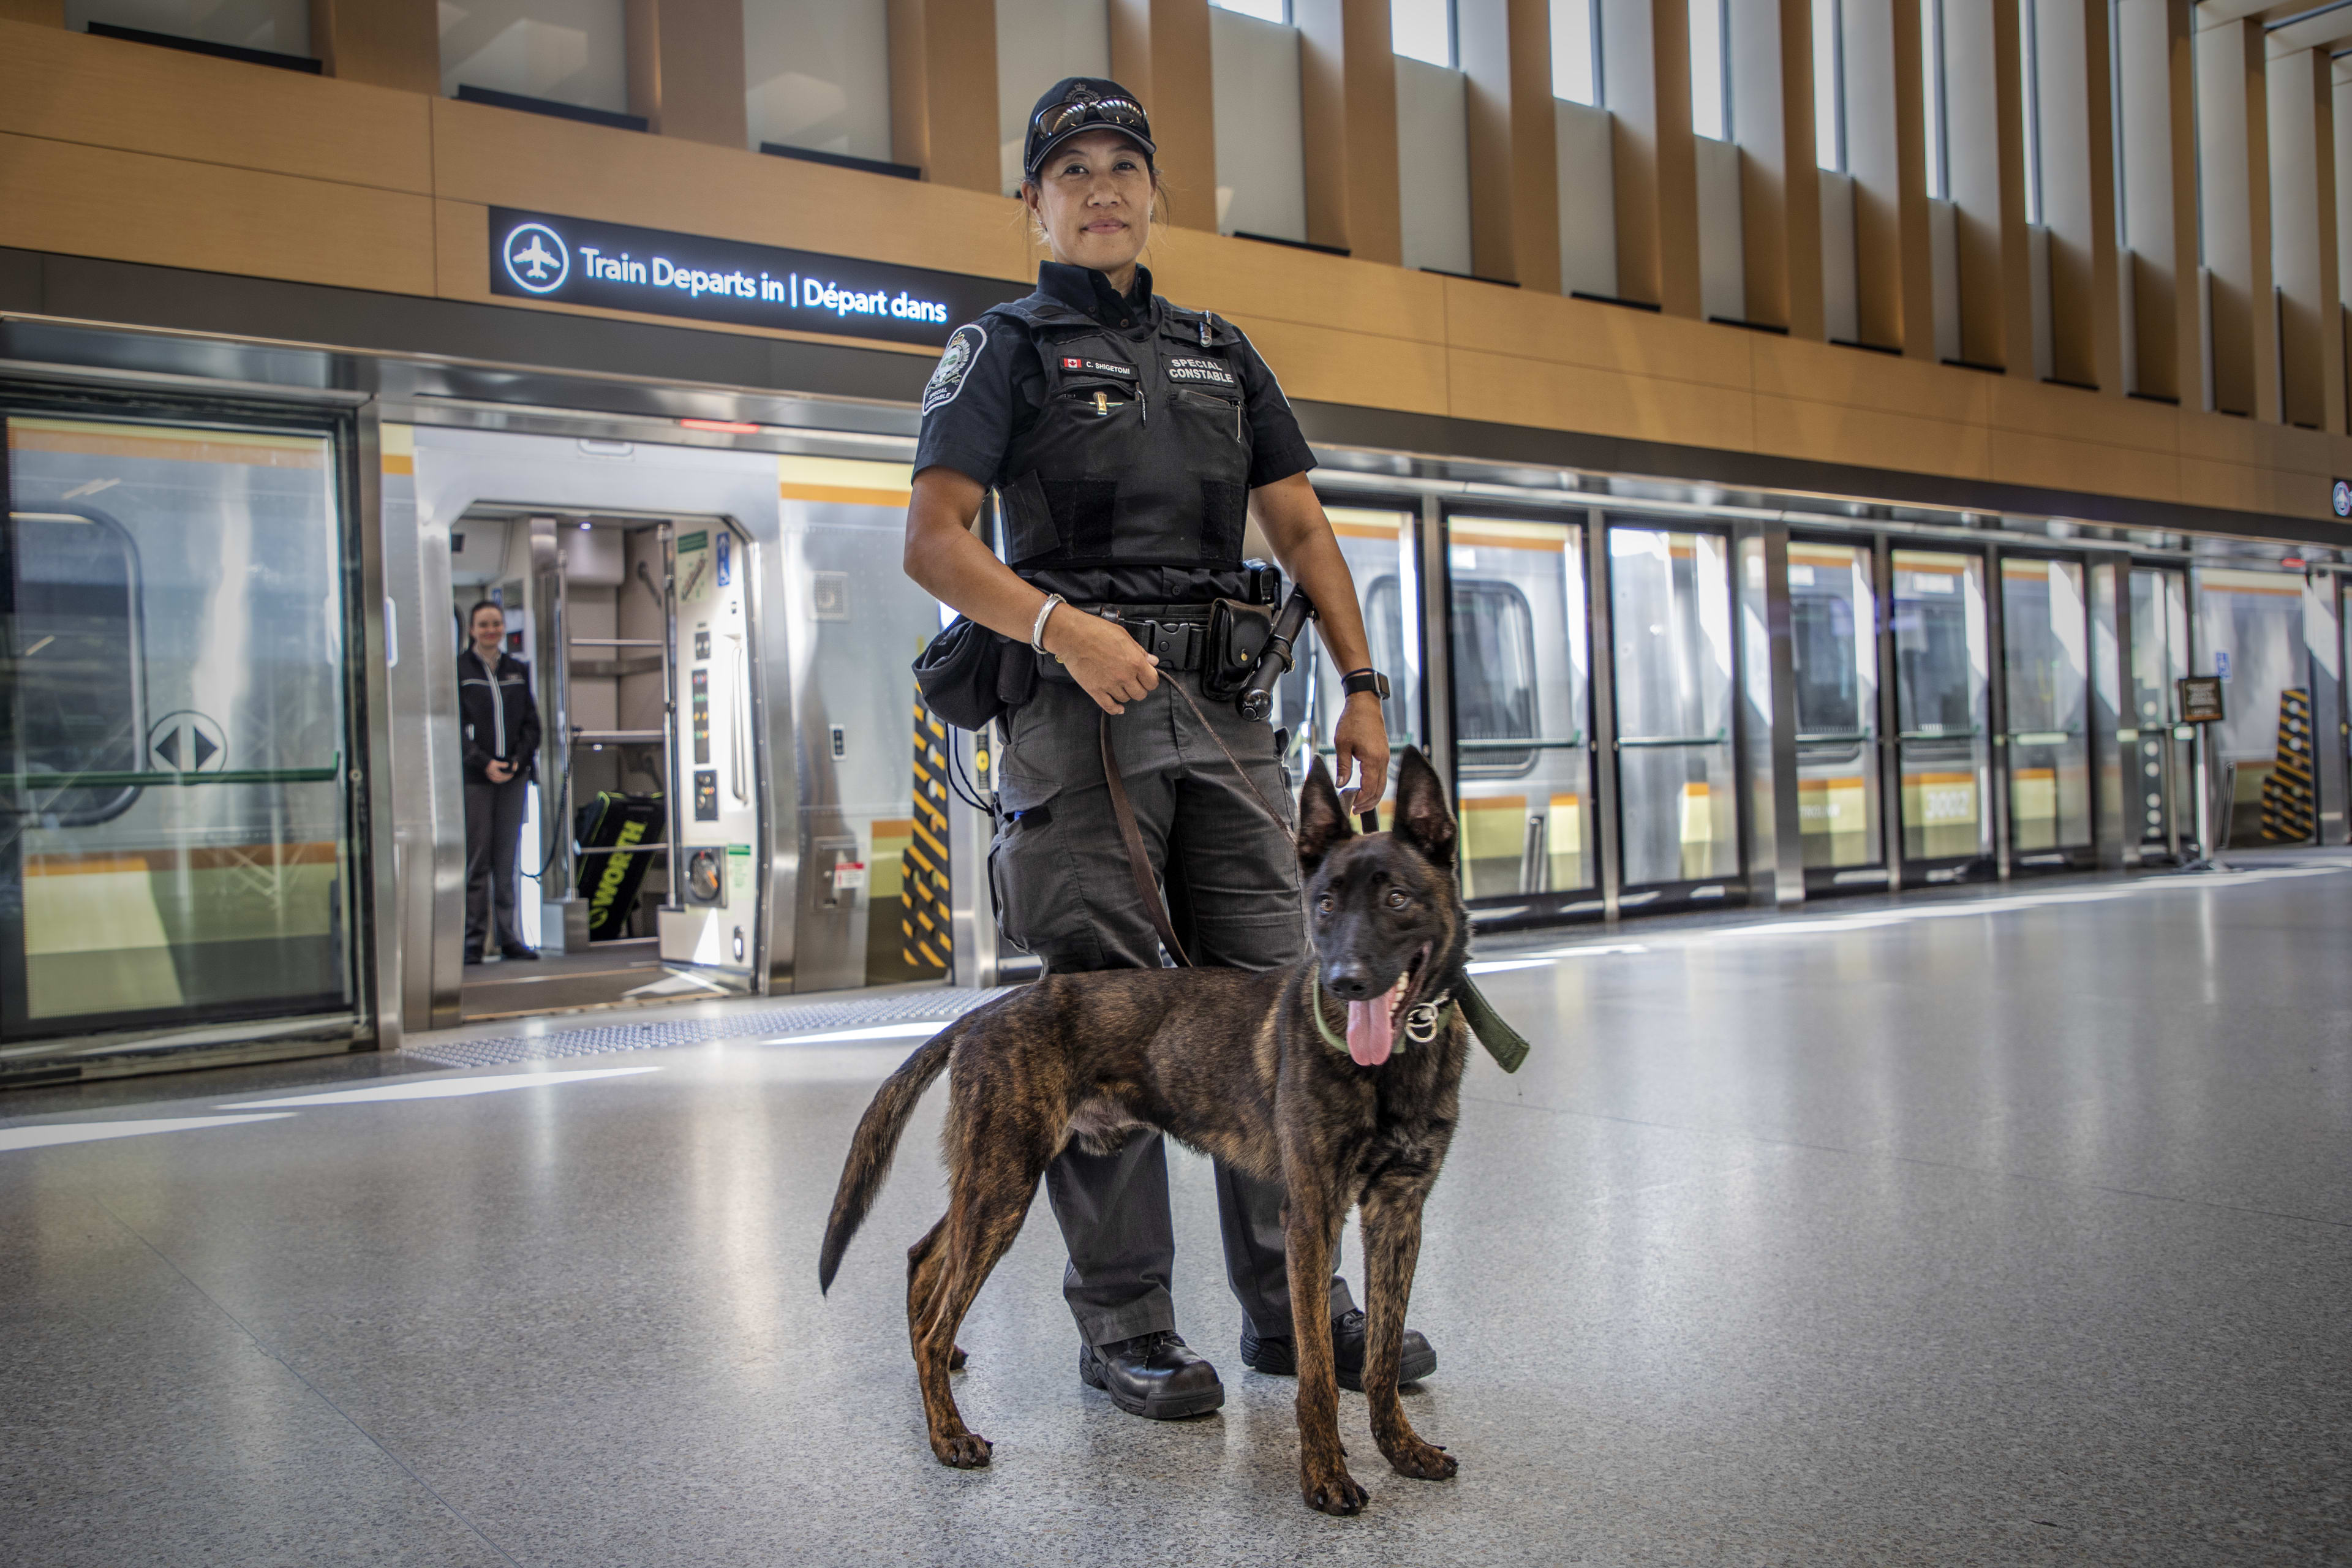 Transit Safety Officer Cindy Shigetomi and her K9 partner Raiden at the